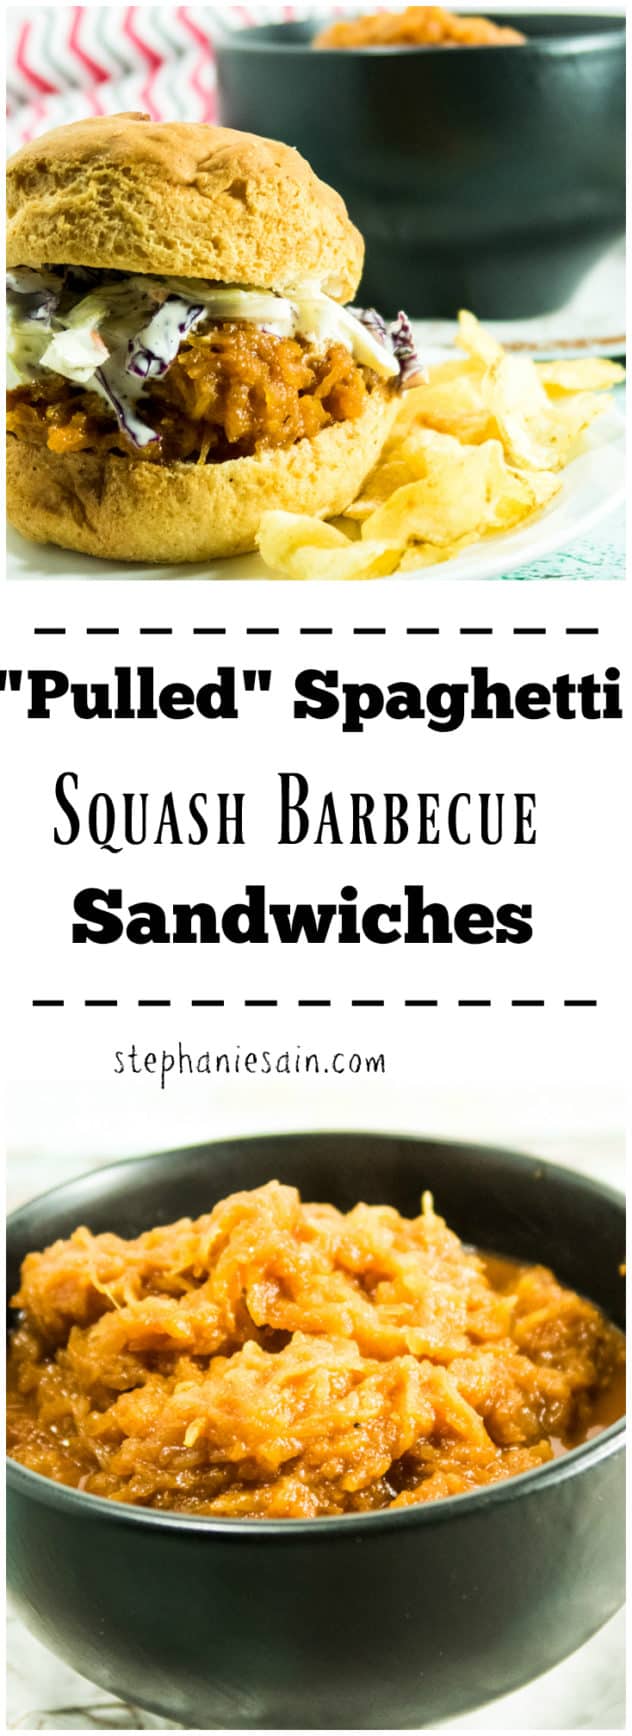 "Pulled" Spaghetti Squash Barbecue Sandwiches are a tasty, vegetarian or vegan option for your next cookout. Slow cooked with homemade BBQ sauce and served with your favorite toppings. Gluten free, Vegetarian, and Vegan option.